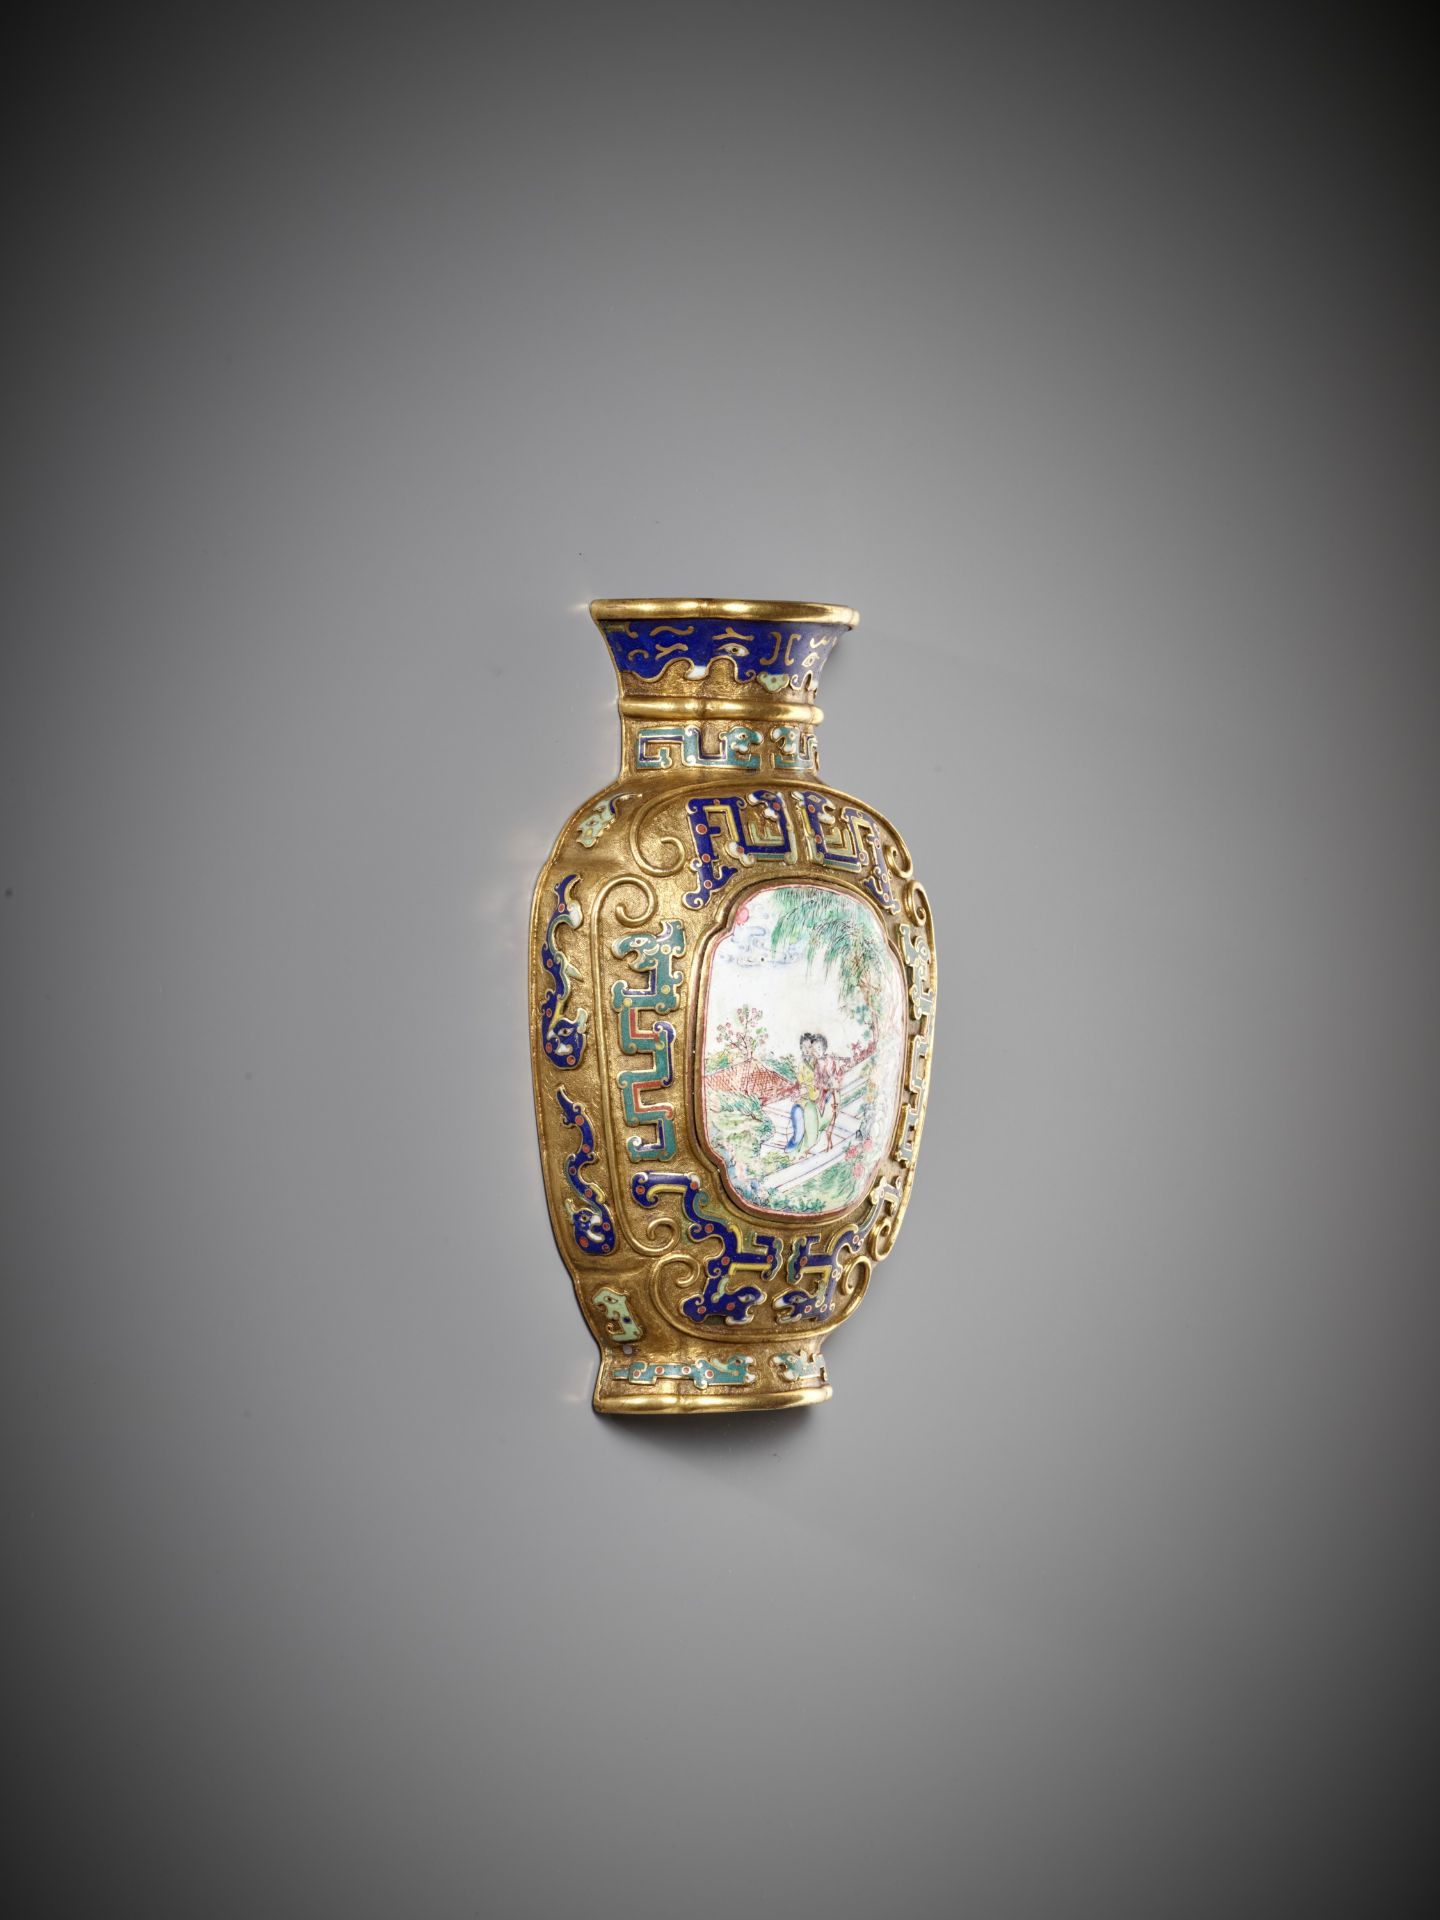 A CHAMPLEVE AND ENAMEL WALL VASE, GUANGDONG TRIBUTE TO THE IMPERIAL COURT, QIANLONG - Image 10 of 10